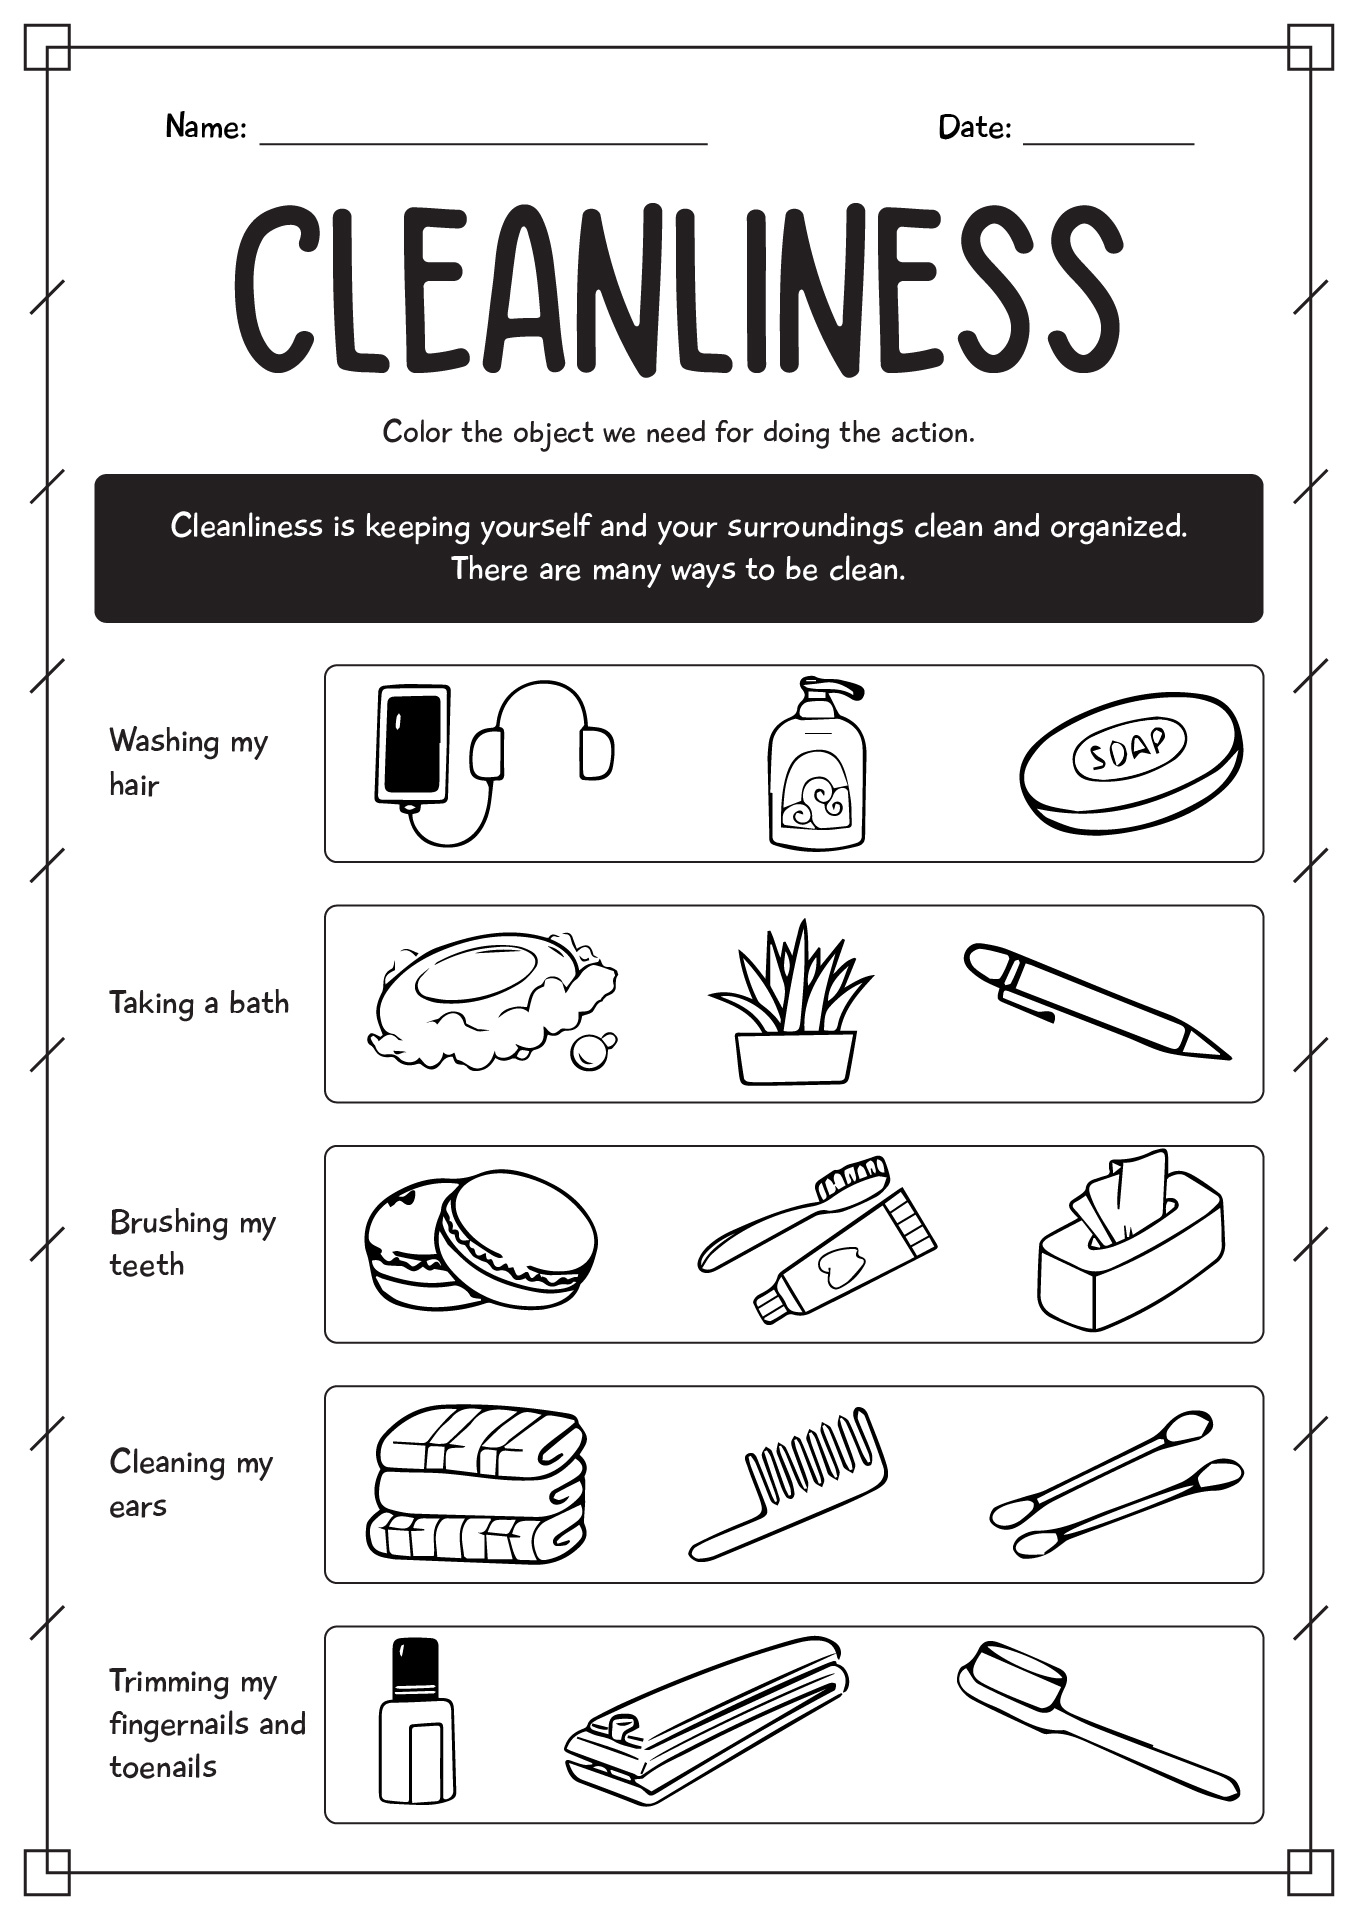 Worksheets On Cleanliness